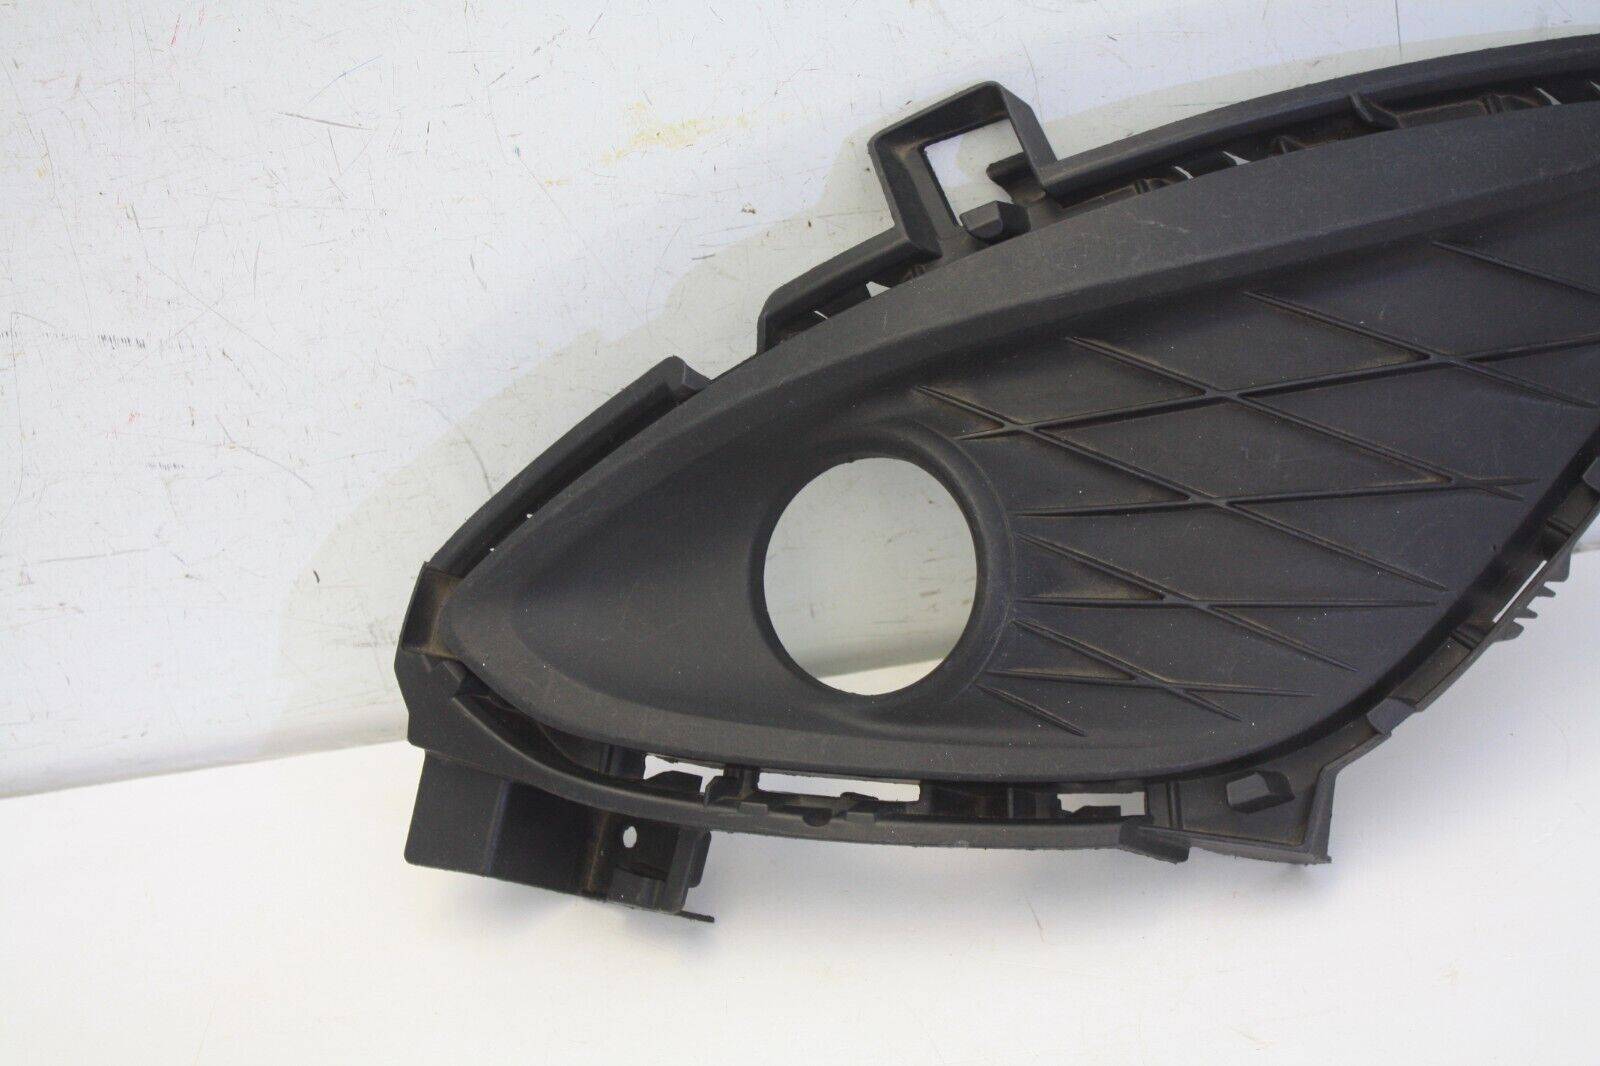 Mazda-5-Front-Bumper-Left-Side-Lower-Grill-2010-TO-2015-C513-50C21-Genuine-176241201496-3